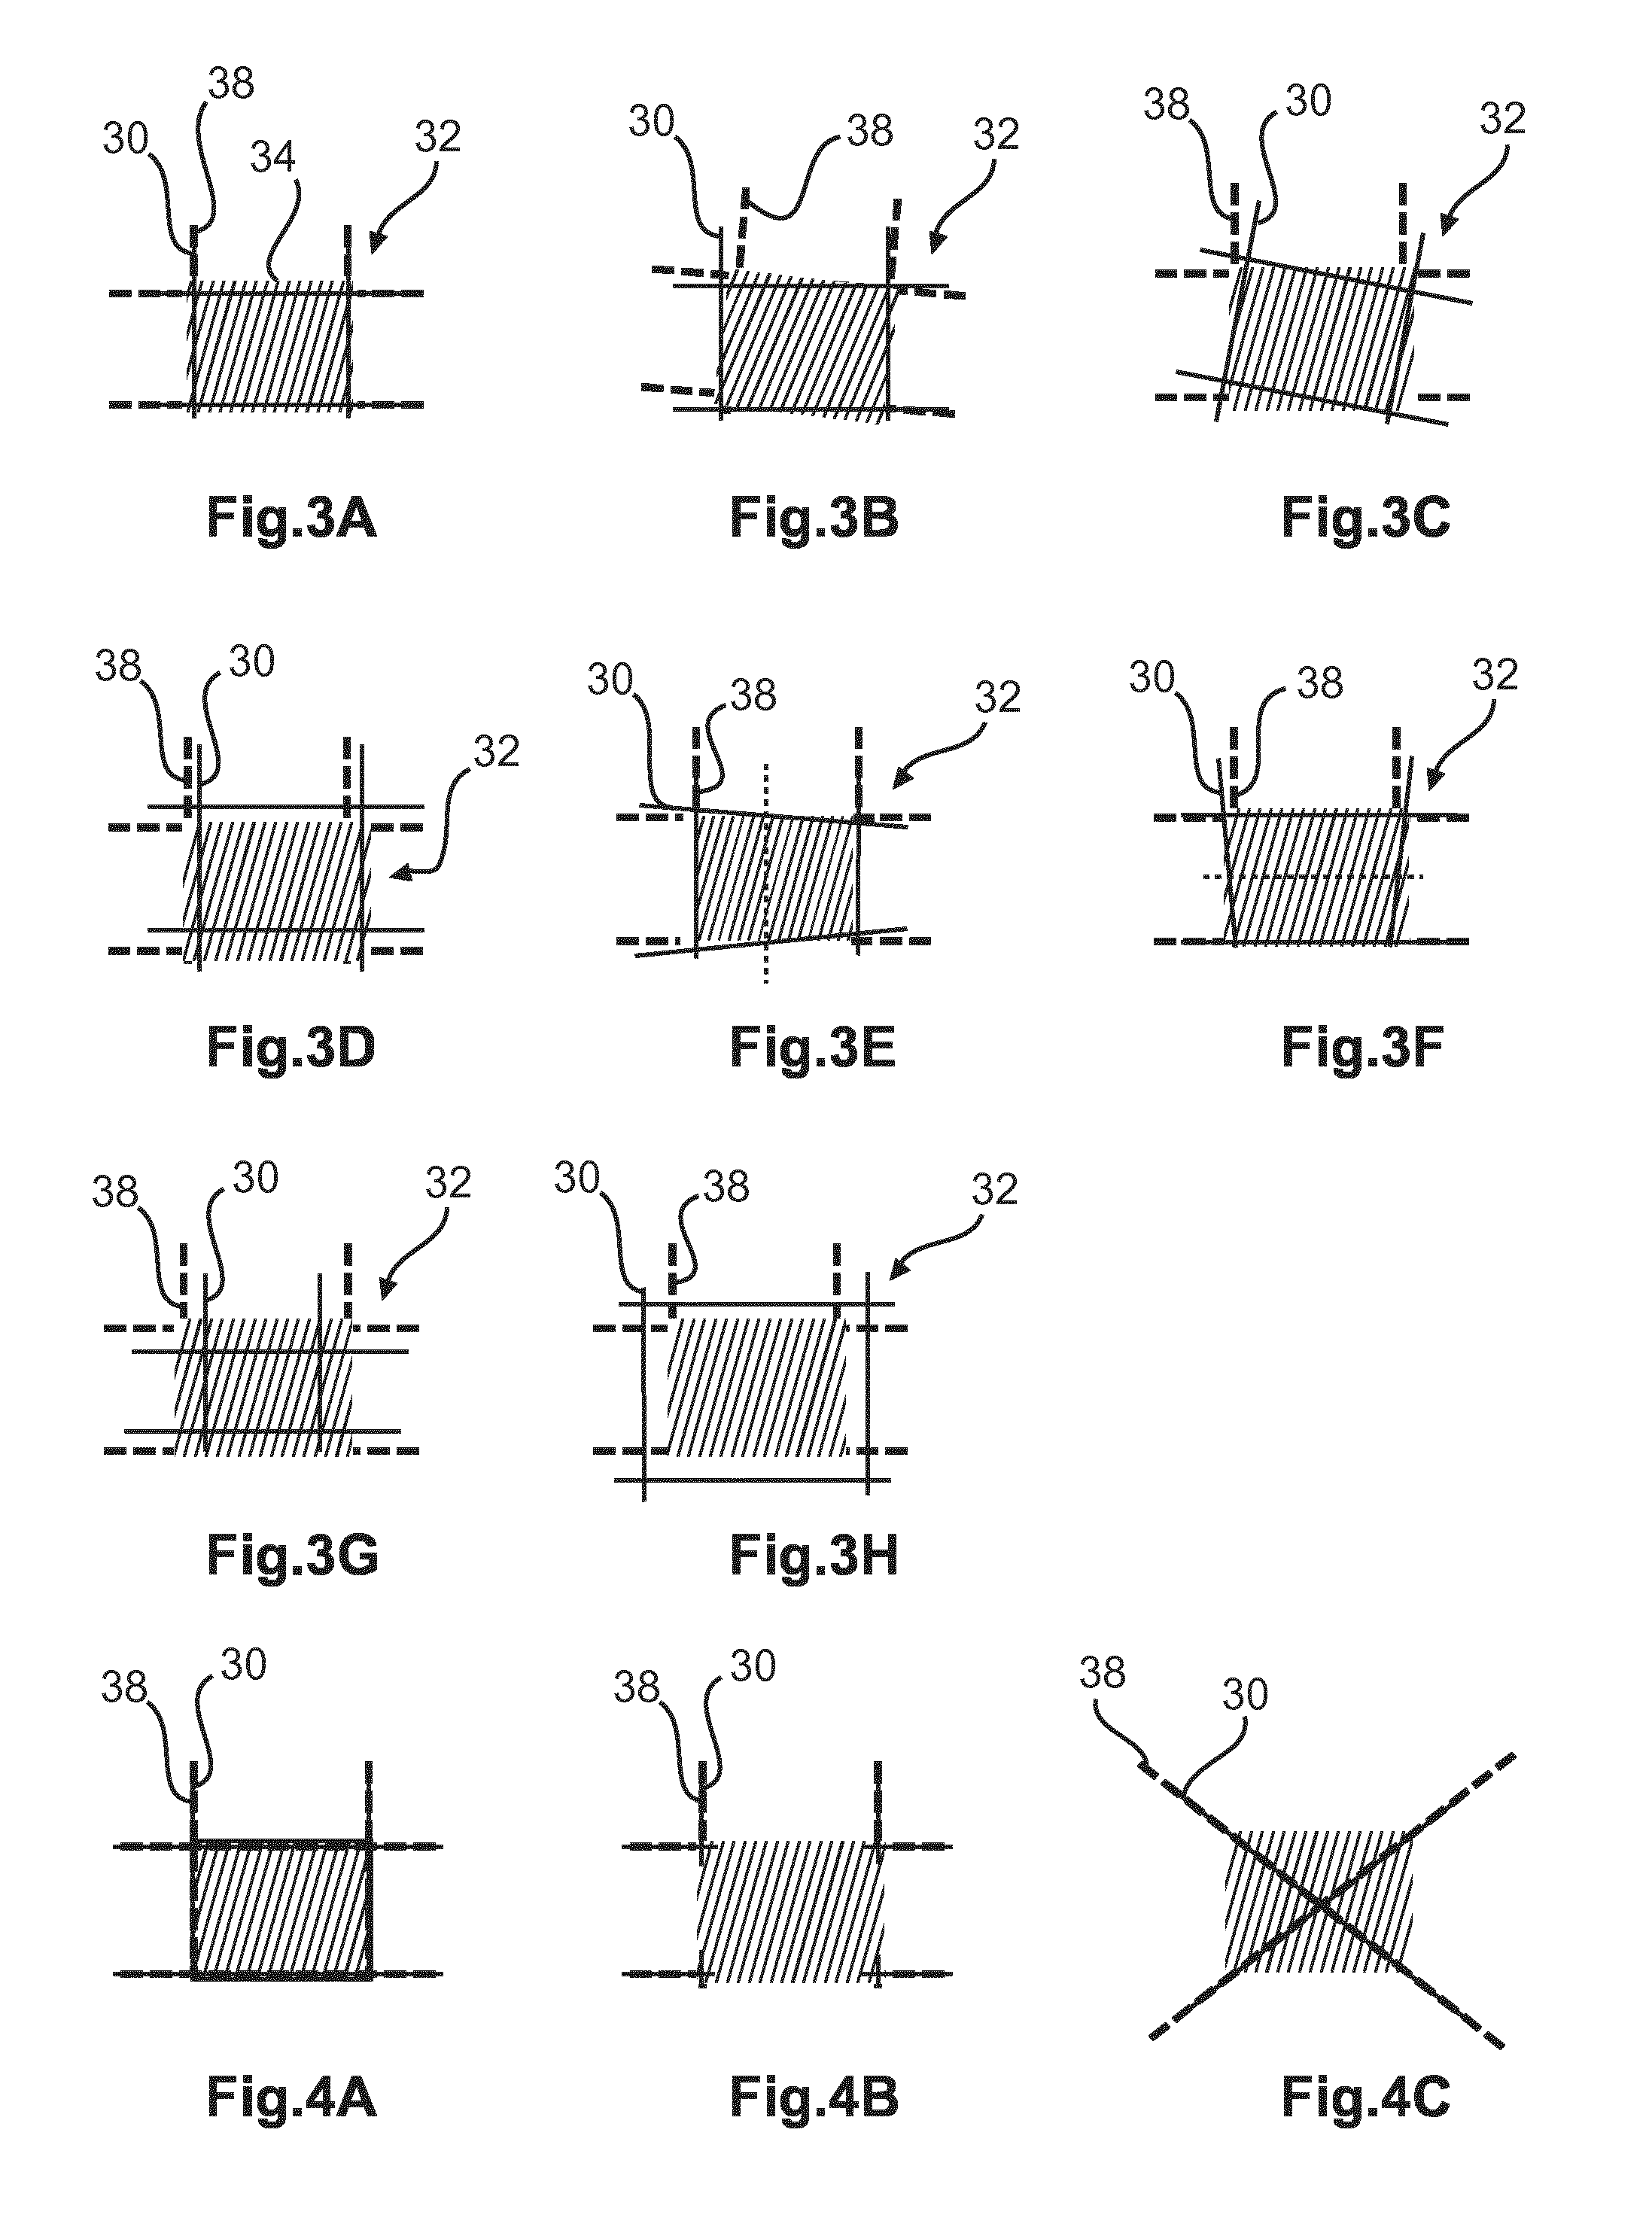 Tube-detector alignment using light projections